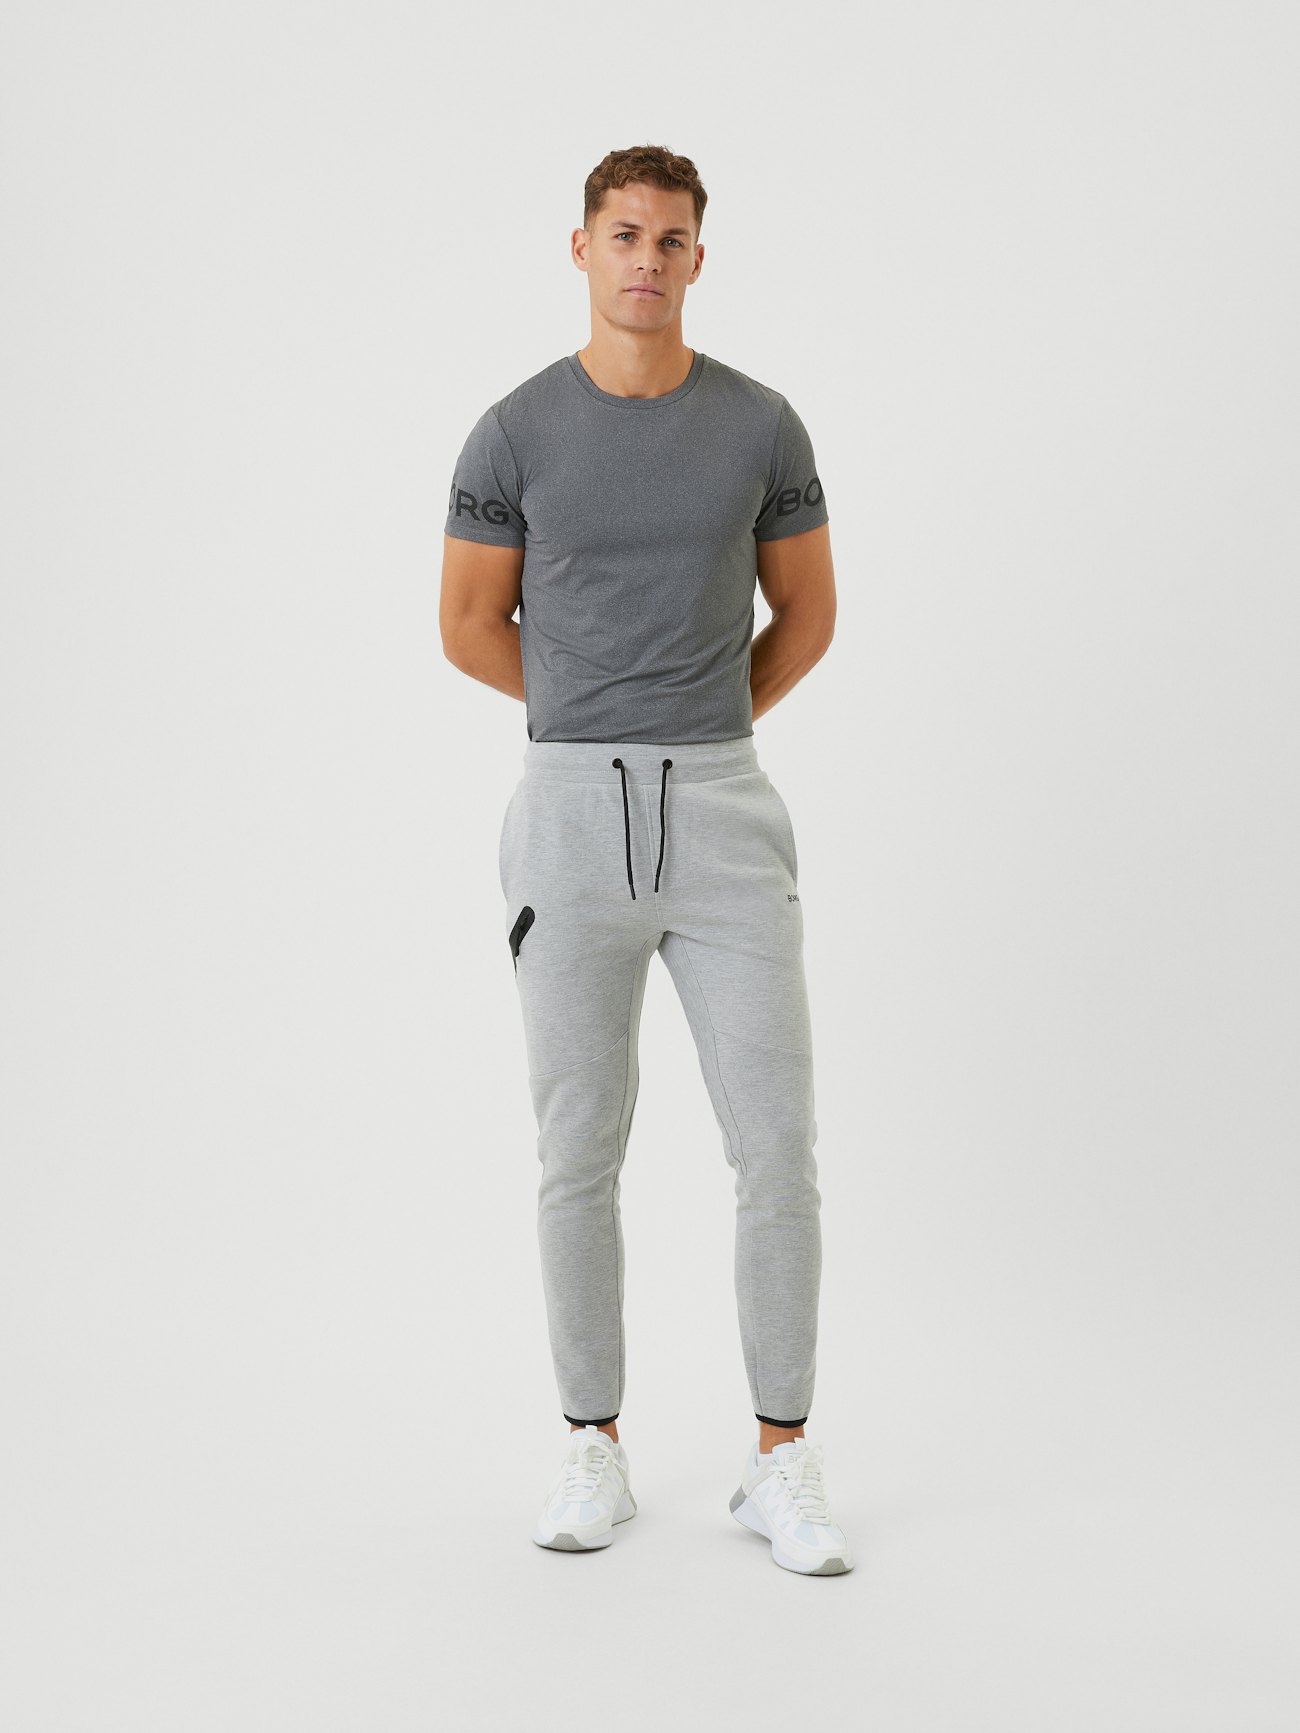 2-piece Loose Fit Hoodie and Joggers Set - Light gray melange